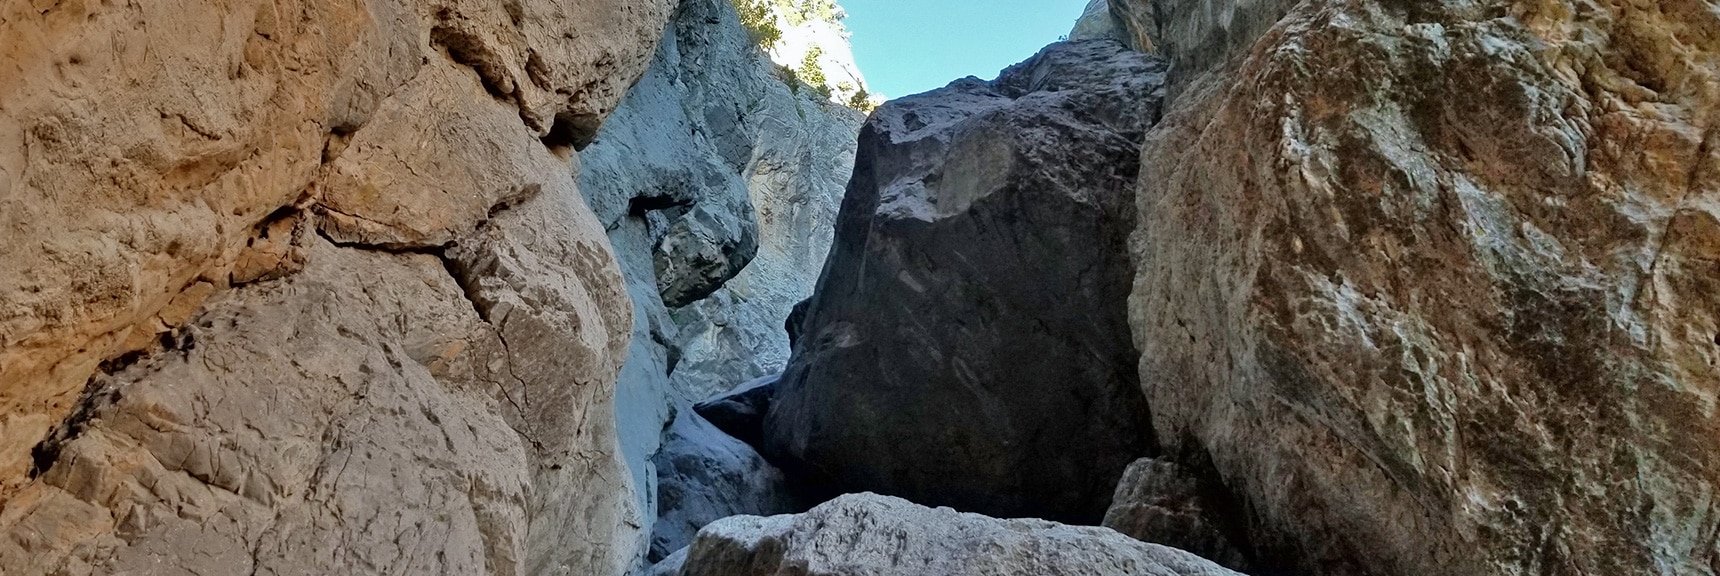 Main Climbing Crack Above Robbers Roost Trail | Robbers Roost and Beyond | Spring Mountains, Nevada